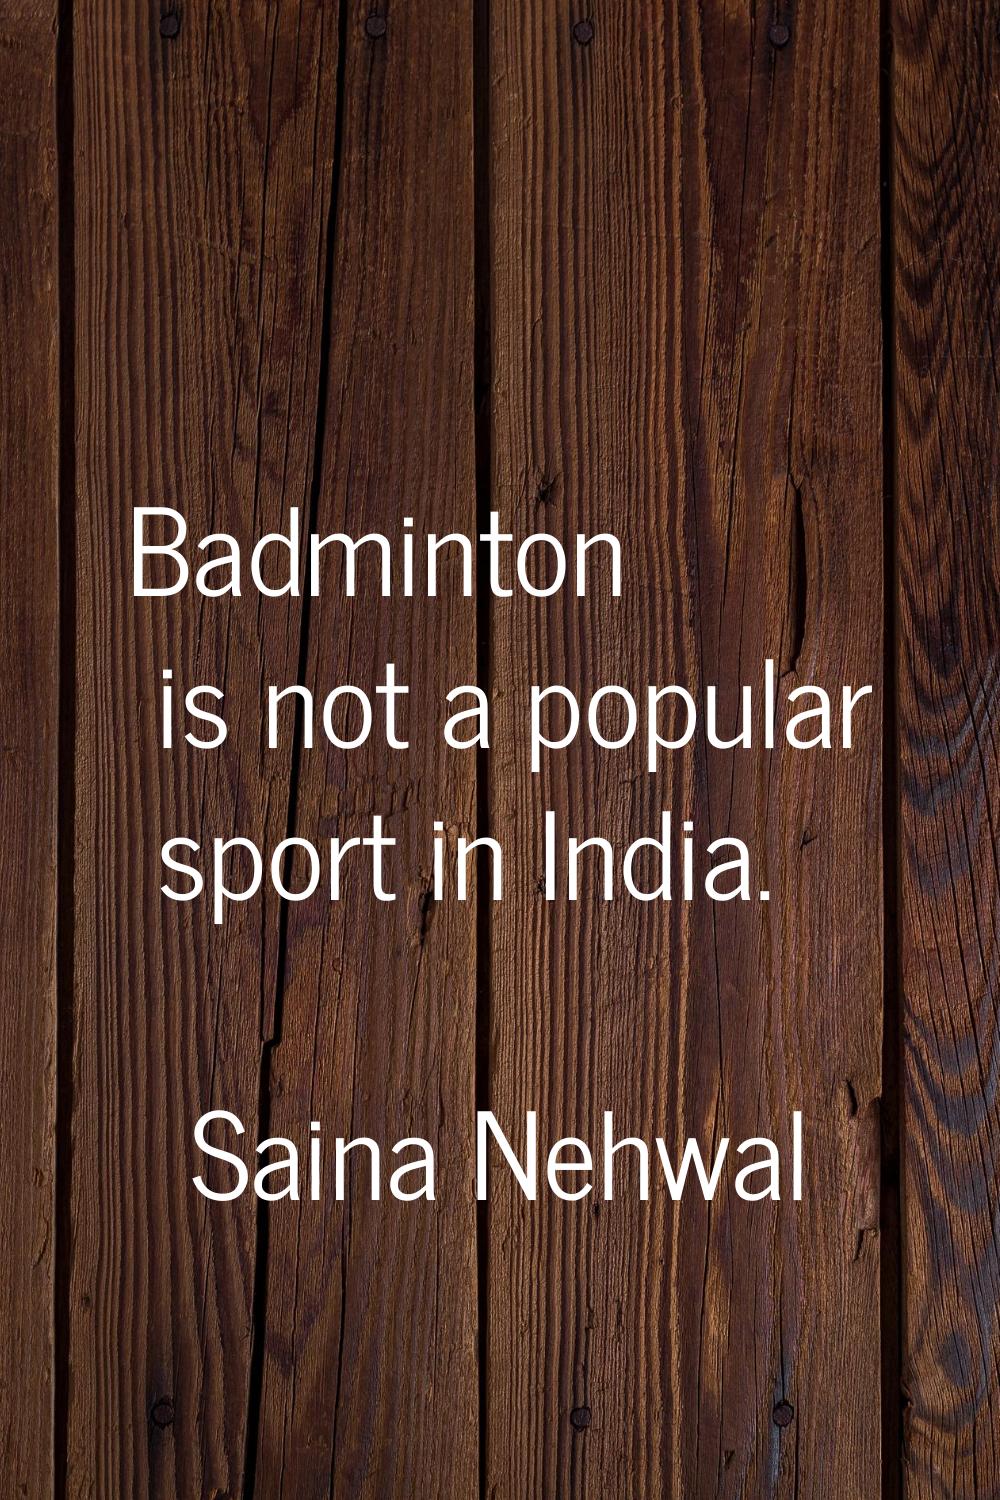 Badminton is not a popular sport in India.